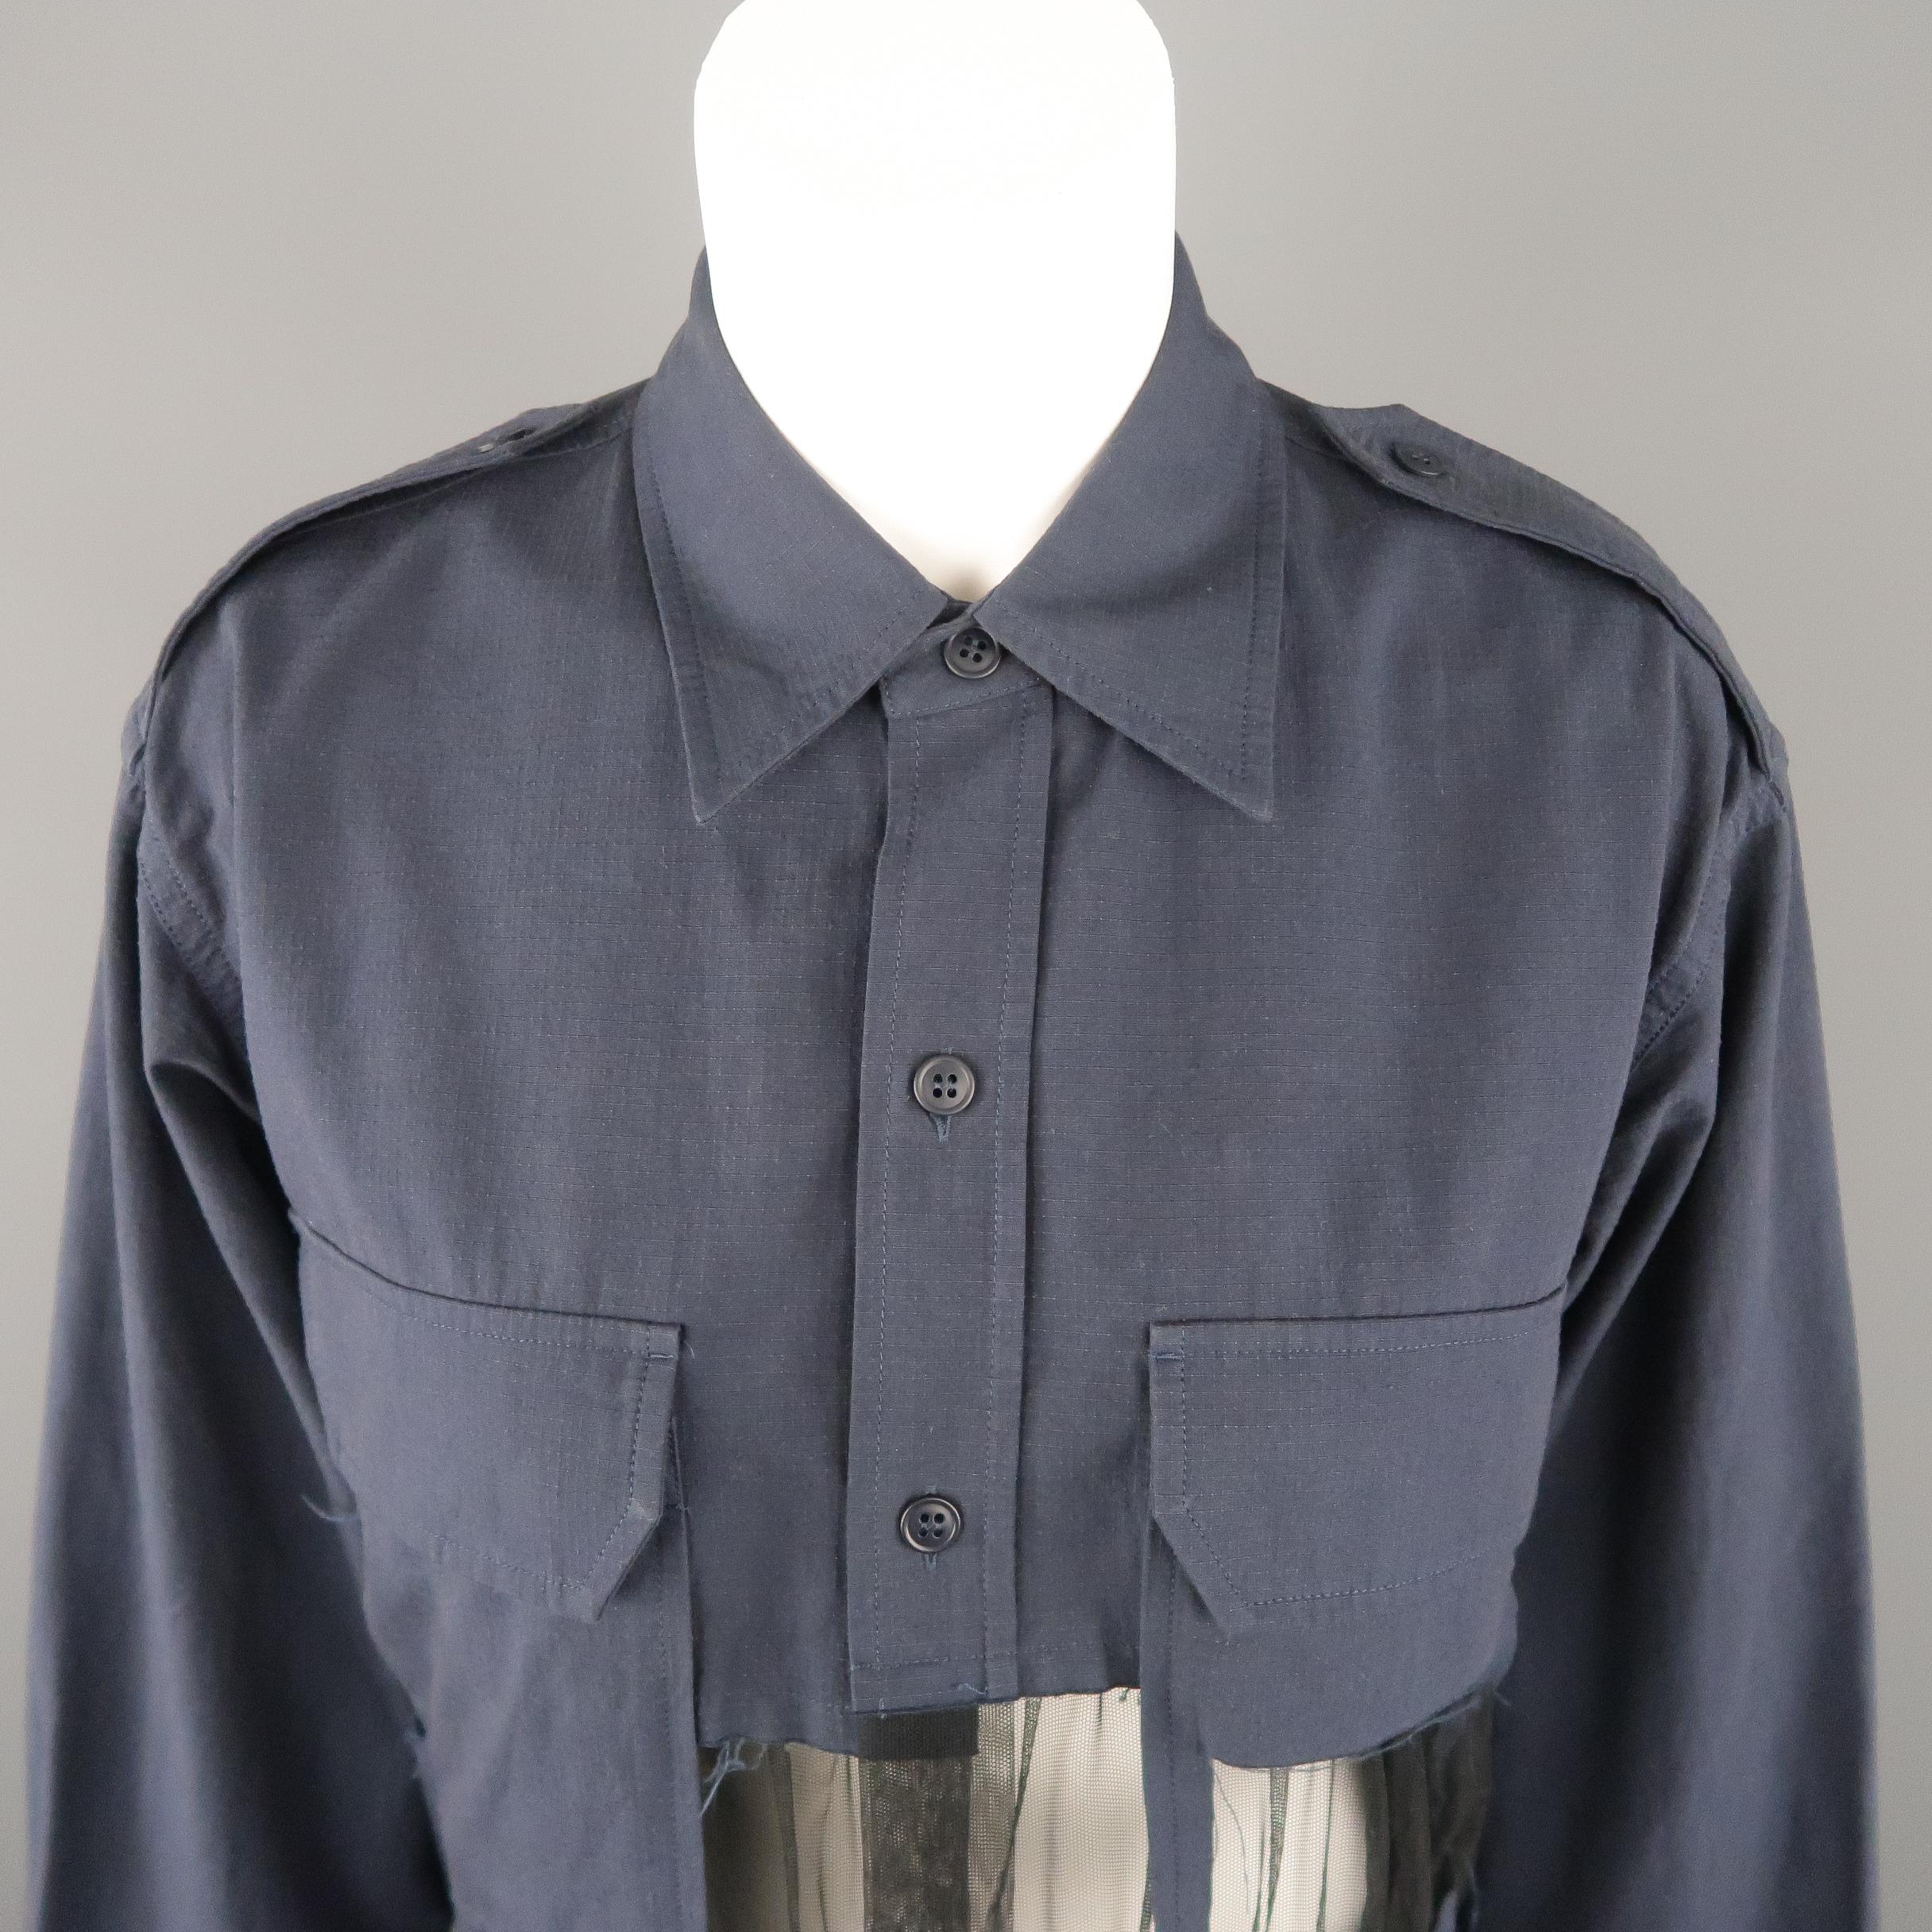 MAISON MARGIELA oversized military style shirt comes in muted navy blue textured canvas with a pointed collar, epaulets, patch flap breast pockets, and gathered black tulle deconstructed insert panels. Made in Italy.
 
Excellent Pre-Owned